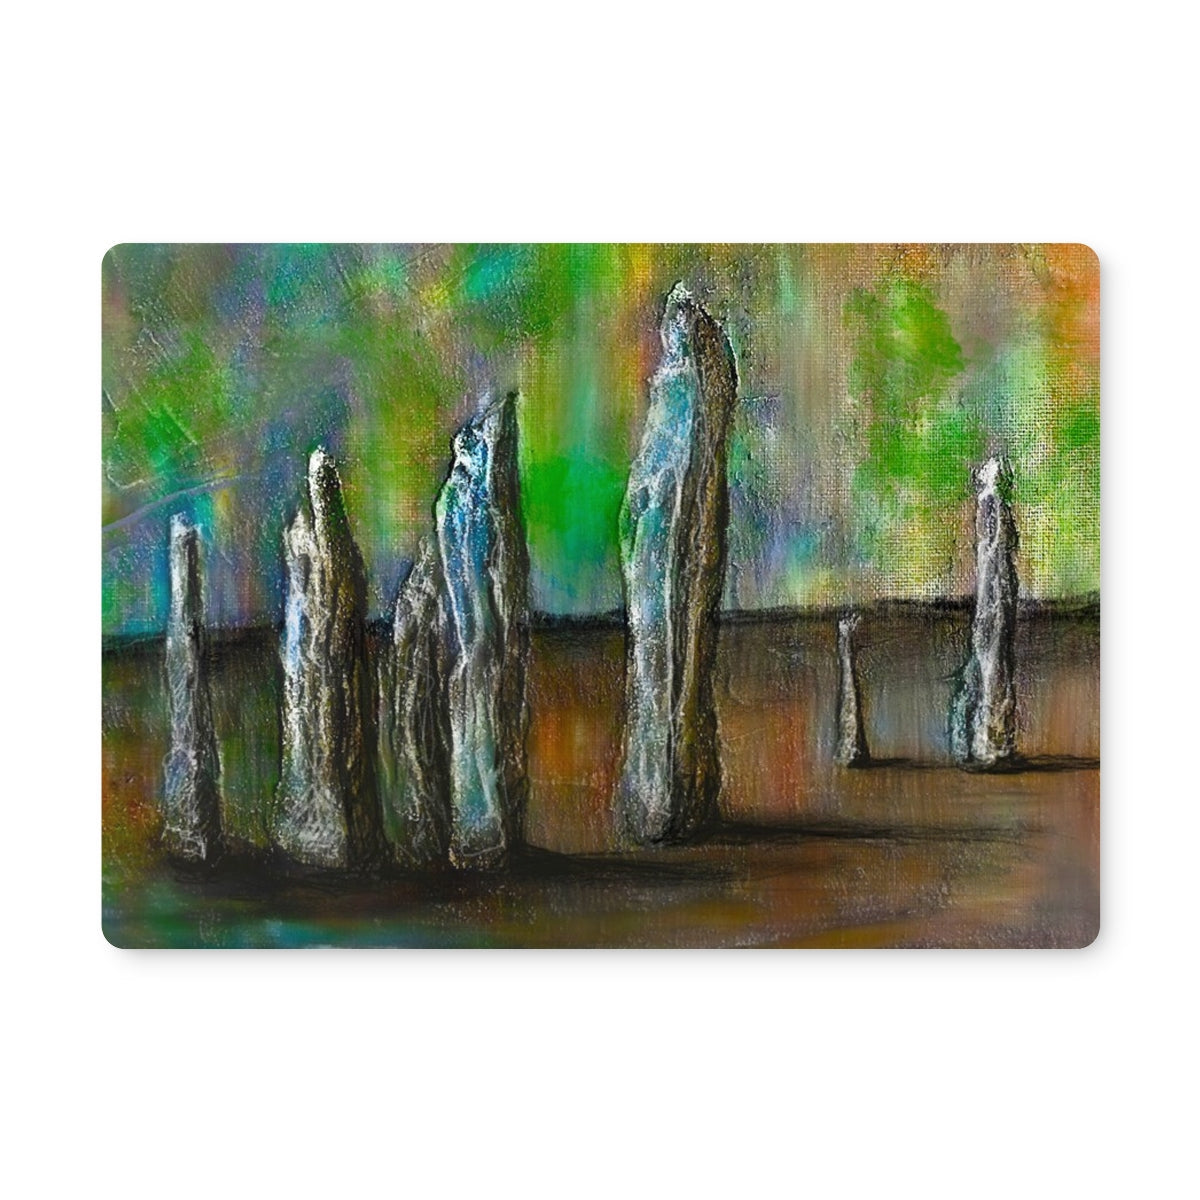 Callanish Northern Lights Art Gifts Placemat-Placemats-Hebridean Islands Art Gallery-Single Placemat-Paintings, Prints, Homeware, Art Gifts From Scotland By Scottish Artist Kevin Hunter